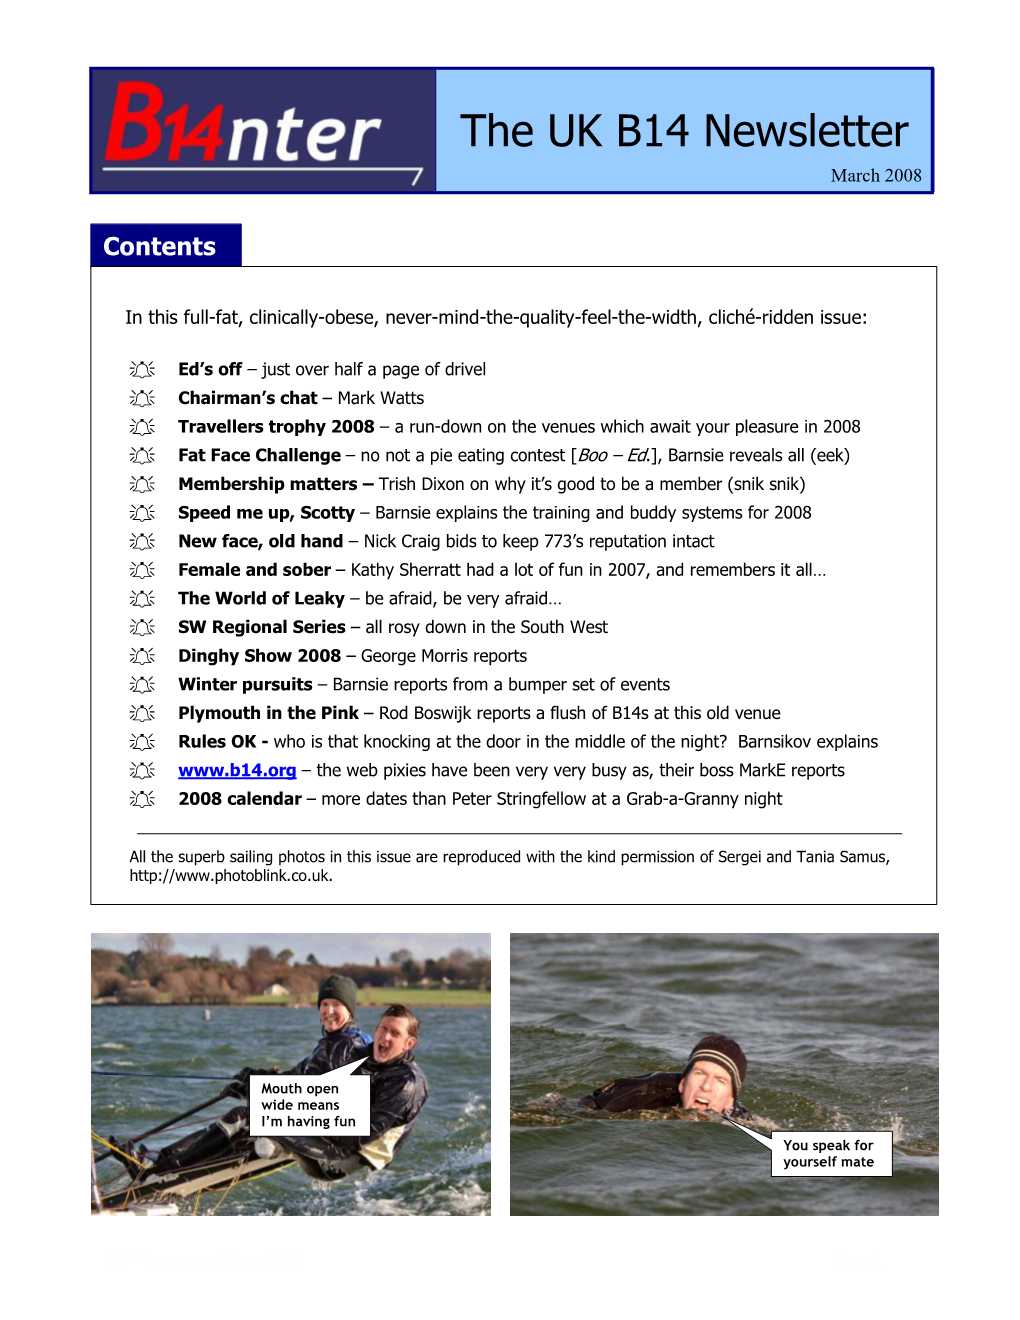 The UK B14 Newsletter March 2008